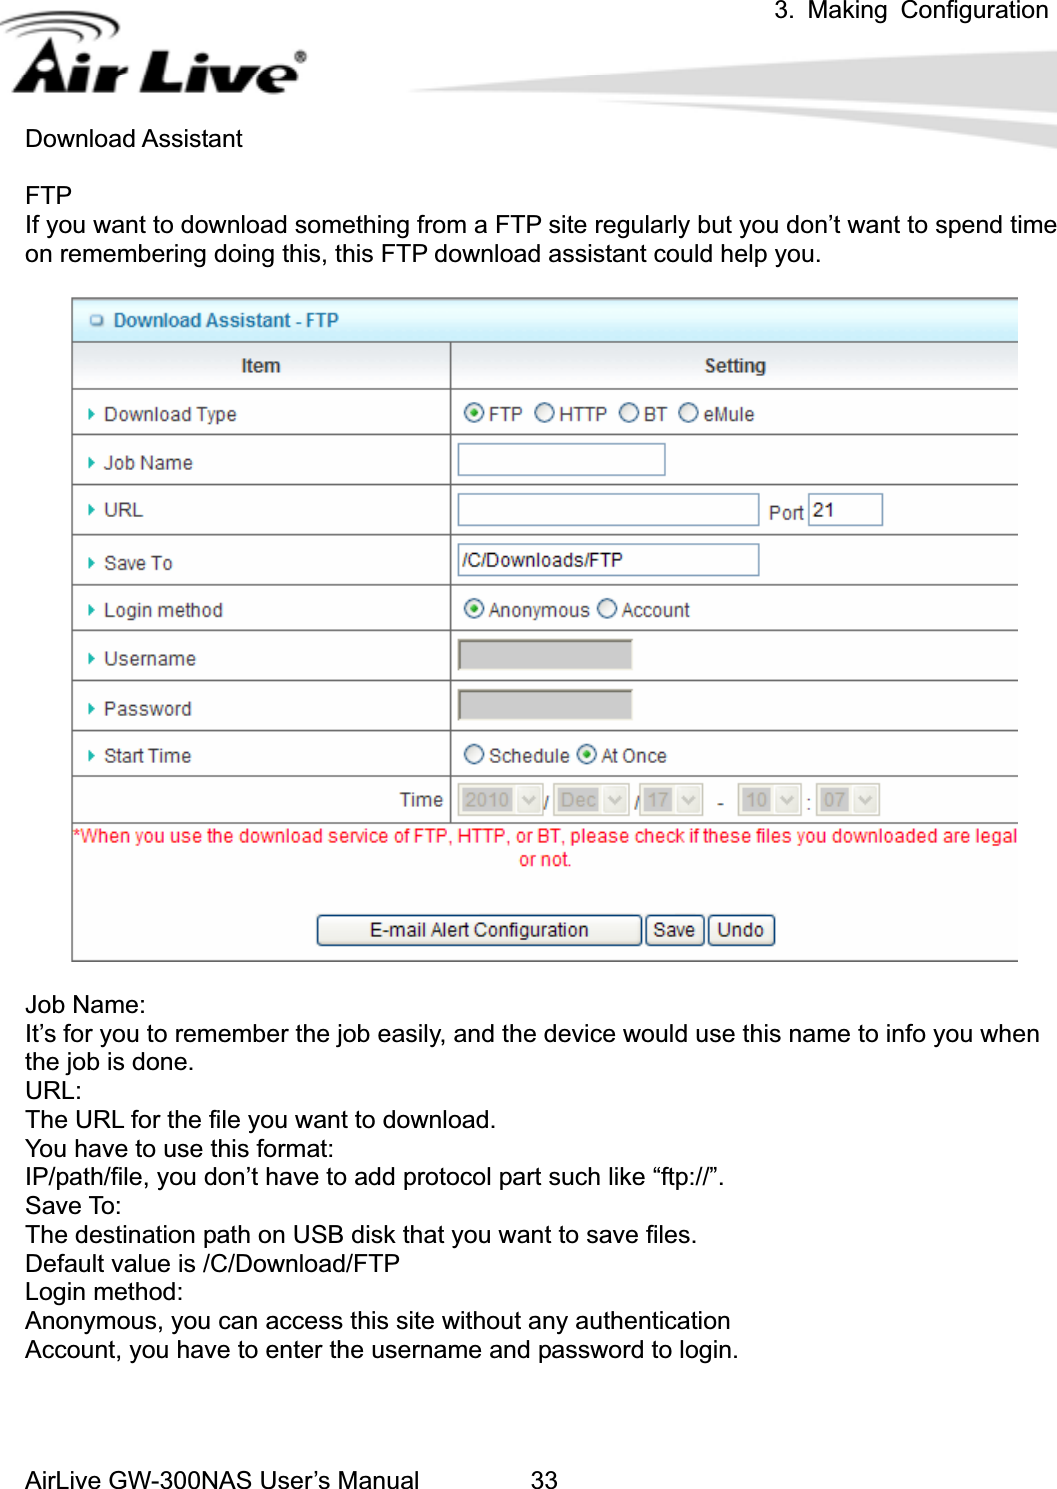 3. Making ConfigurationAirLive GW-300NAS User’s Manual 33Download Assistant FTPIf you want to download something from a FTP site regularly but you don’t want to spend time on remembering doing this, this FTP download assistant could help you. Job Name: It’s for you to remember the job easily, and the device would use this name to info you when the job is done. URL:The URL for the file you want to download. You have to use this format: IP/path/file, you don’t have to add protocol part such like “ftp://”. Save To: The destination path on USB disk that you want to save files. Default value is /C/Download/FTP Login method: Anonymous, you can access this site without any authentication Account, you have to enter the username and password to login. 